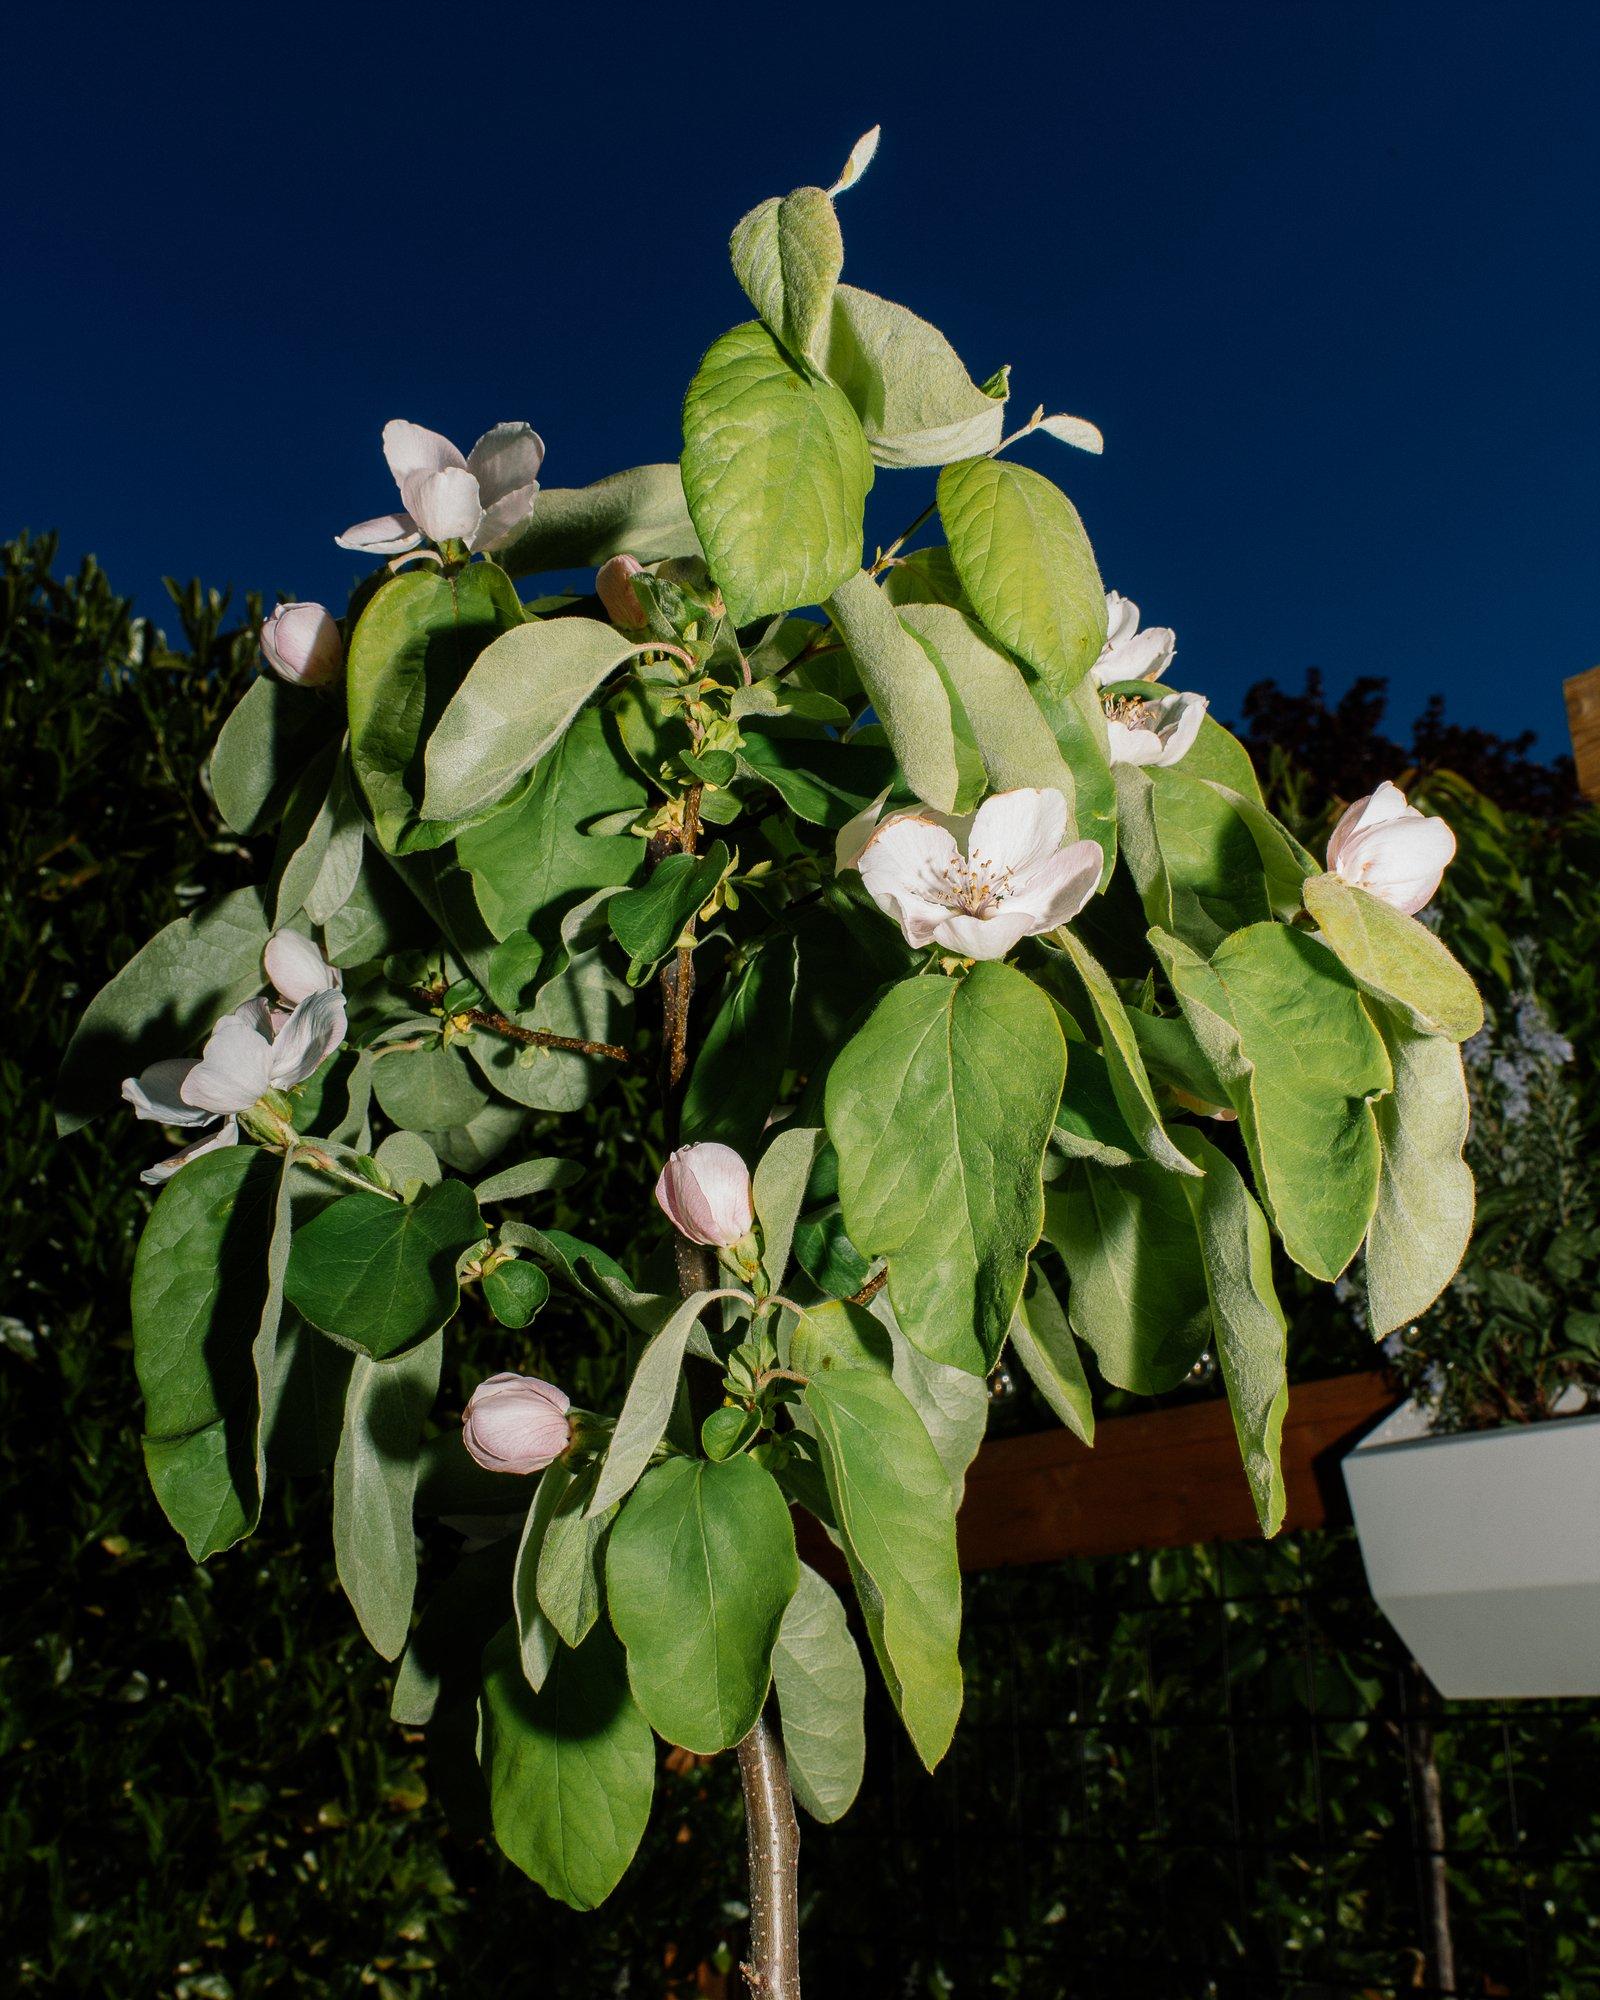 Quince trees produce a tart fruit usually made into jams, jellies, and other preserves 